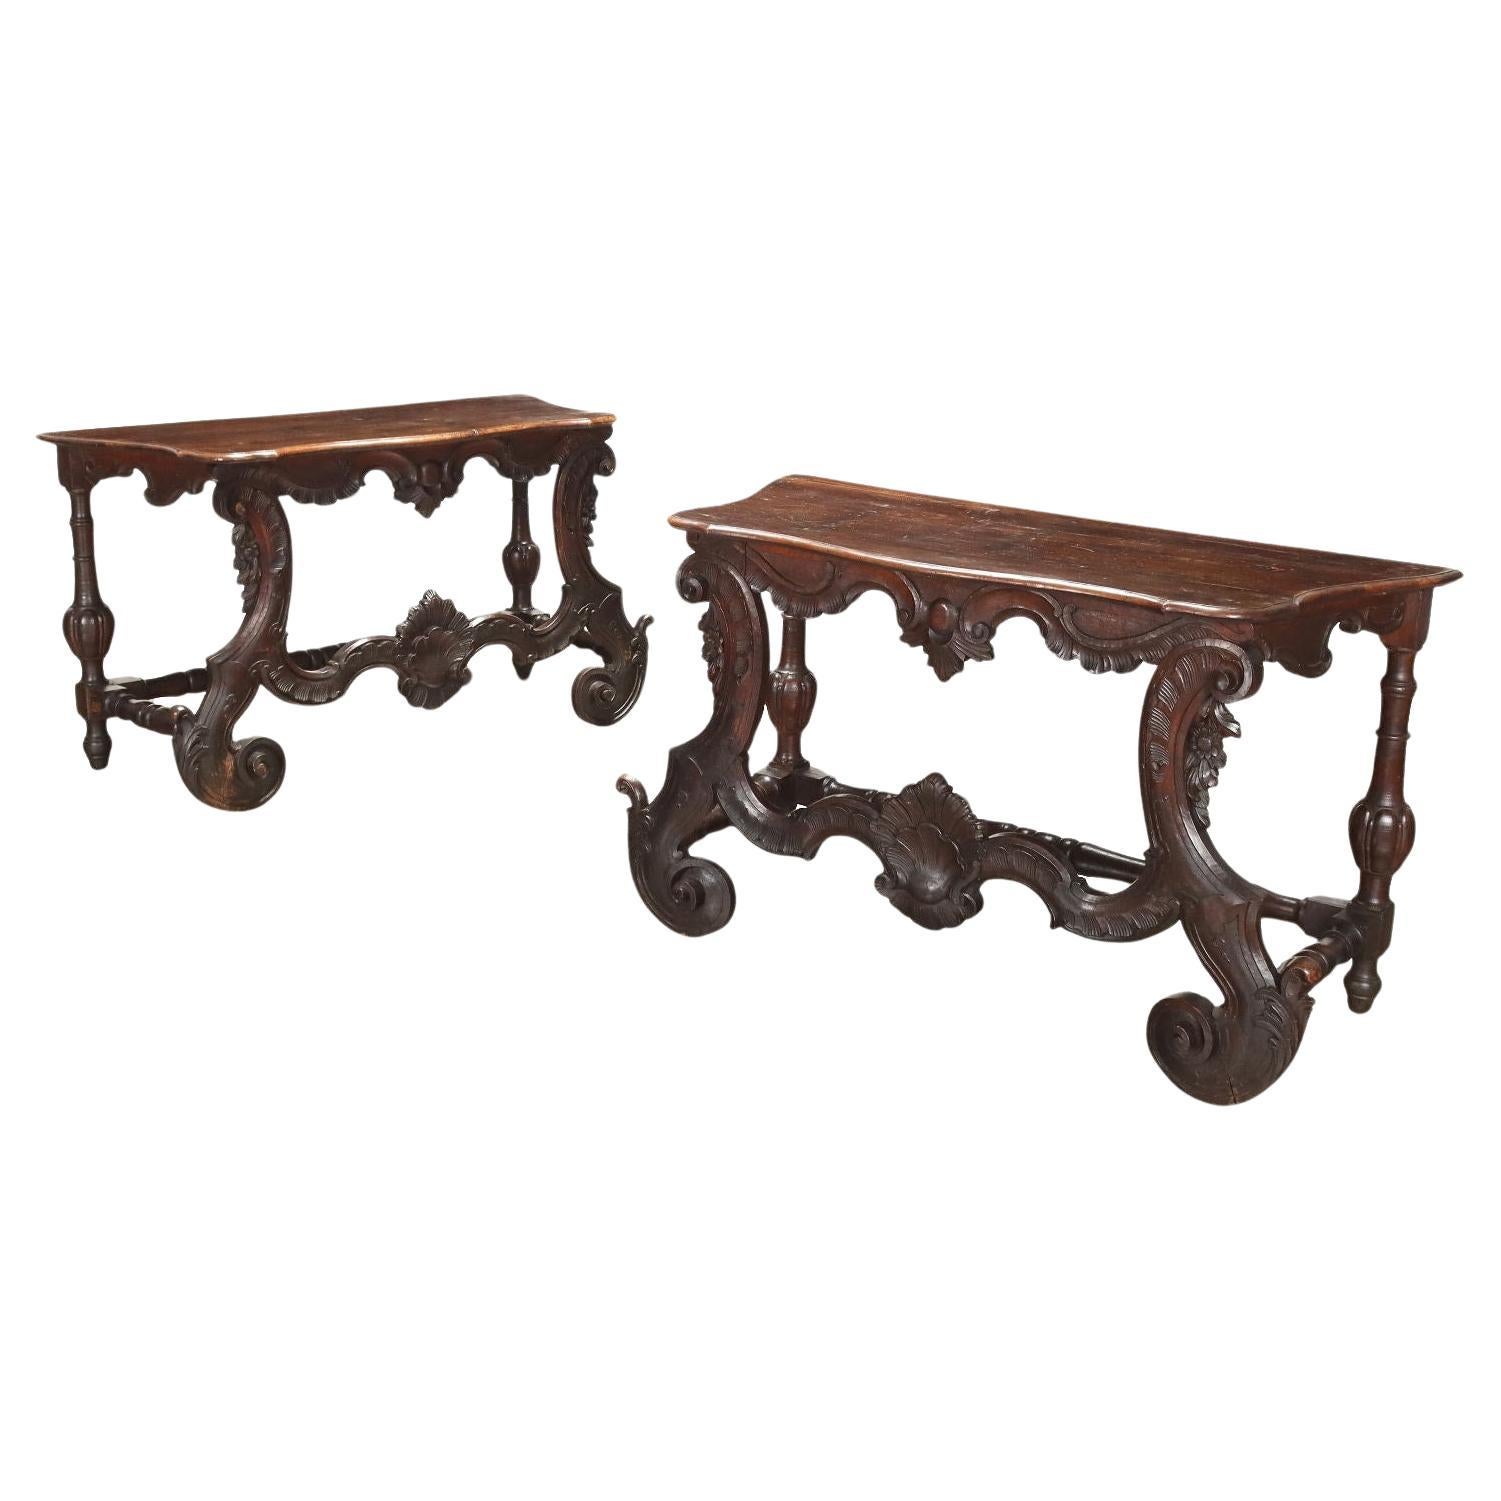 Early 1700s Console Tables